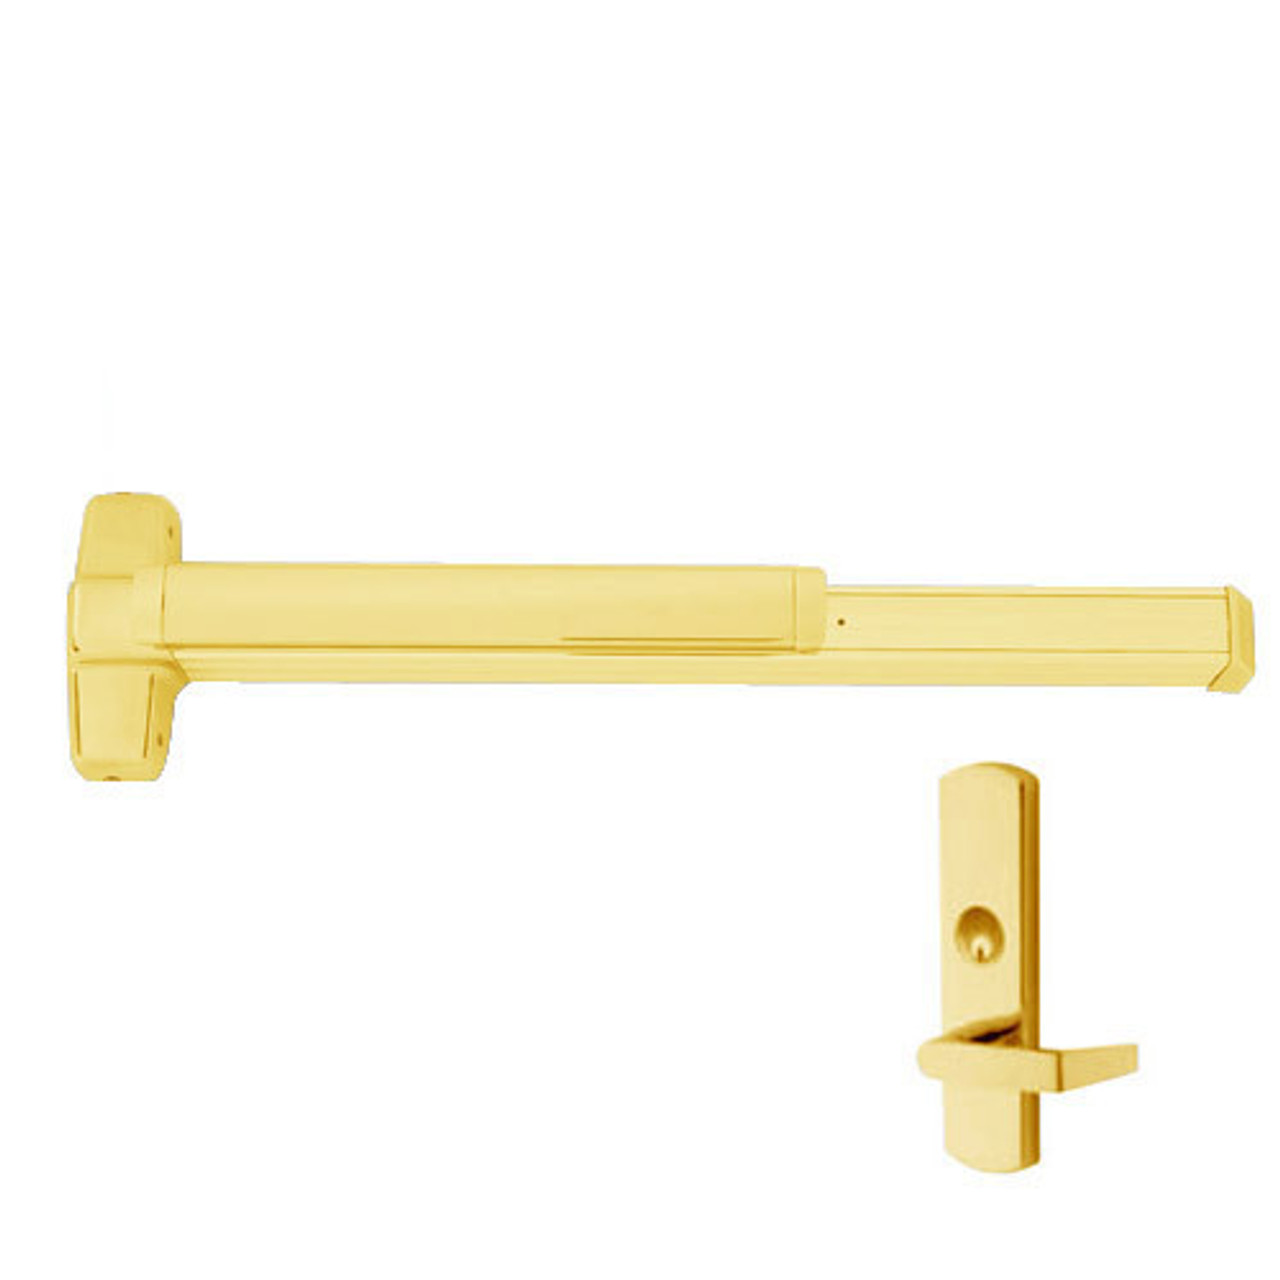 EL9847WDC-L-US3-4-LHR Von Duprin Exit Device with Electric Latch Retraction in Bright Brass